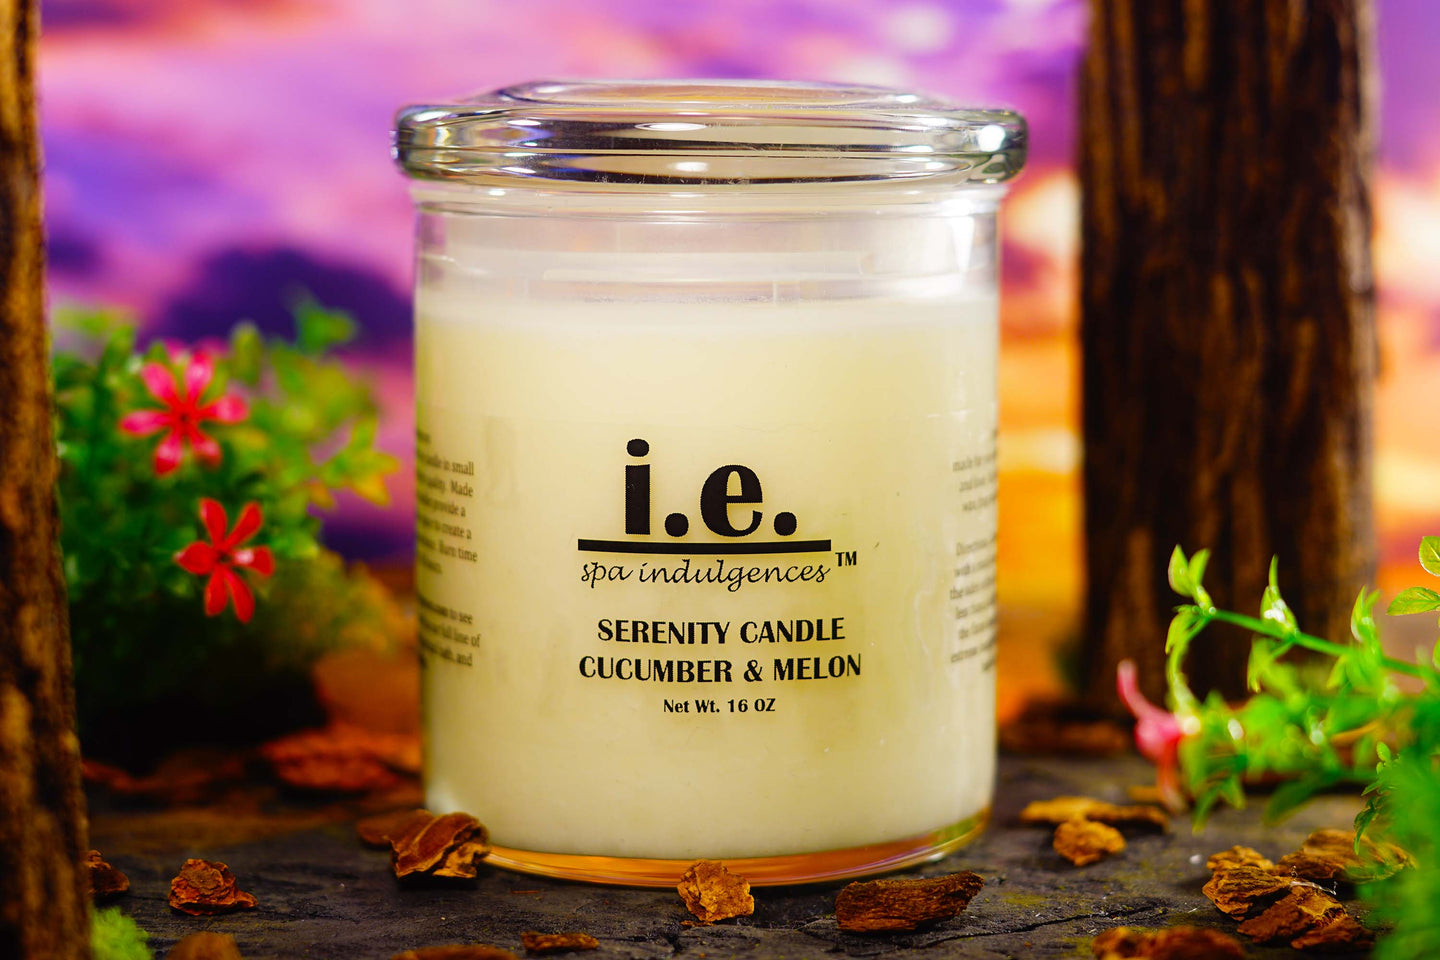 Serenity Candle - Cucumber & Melon